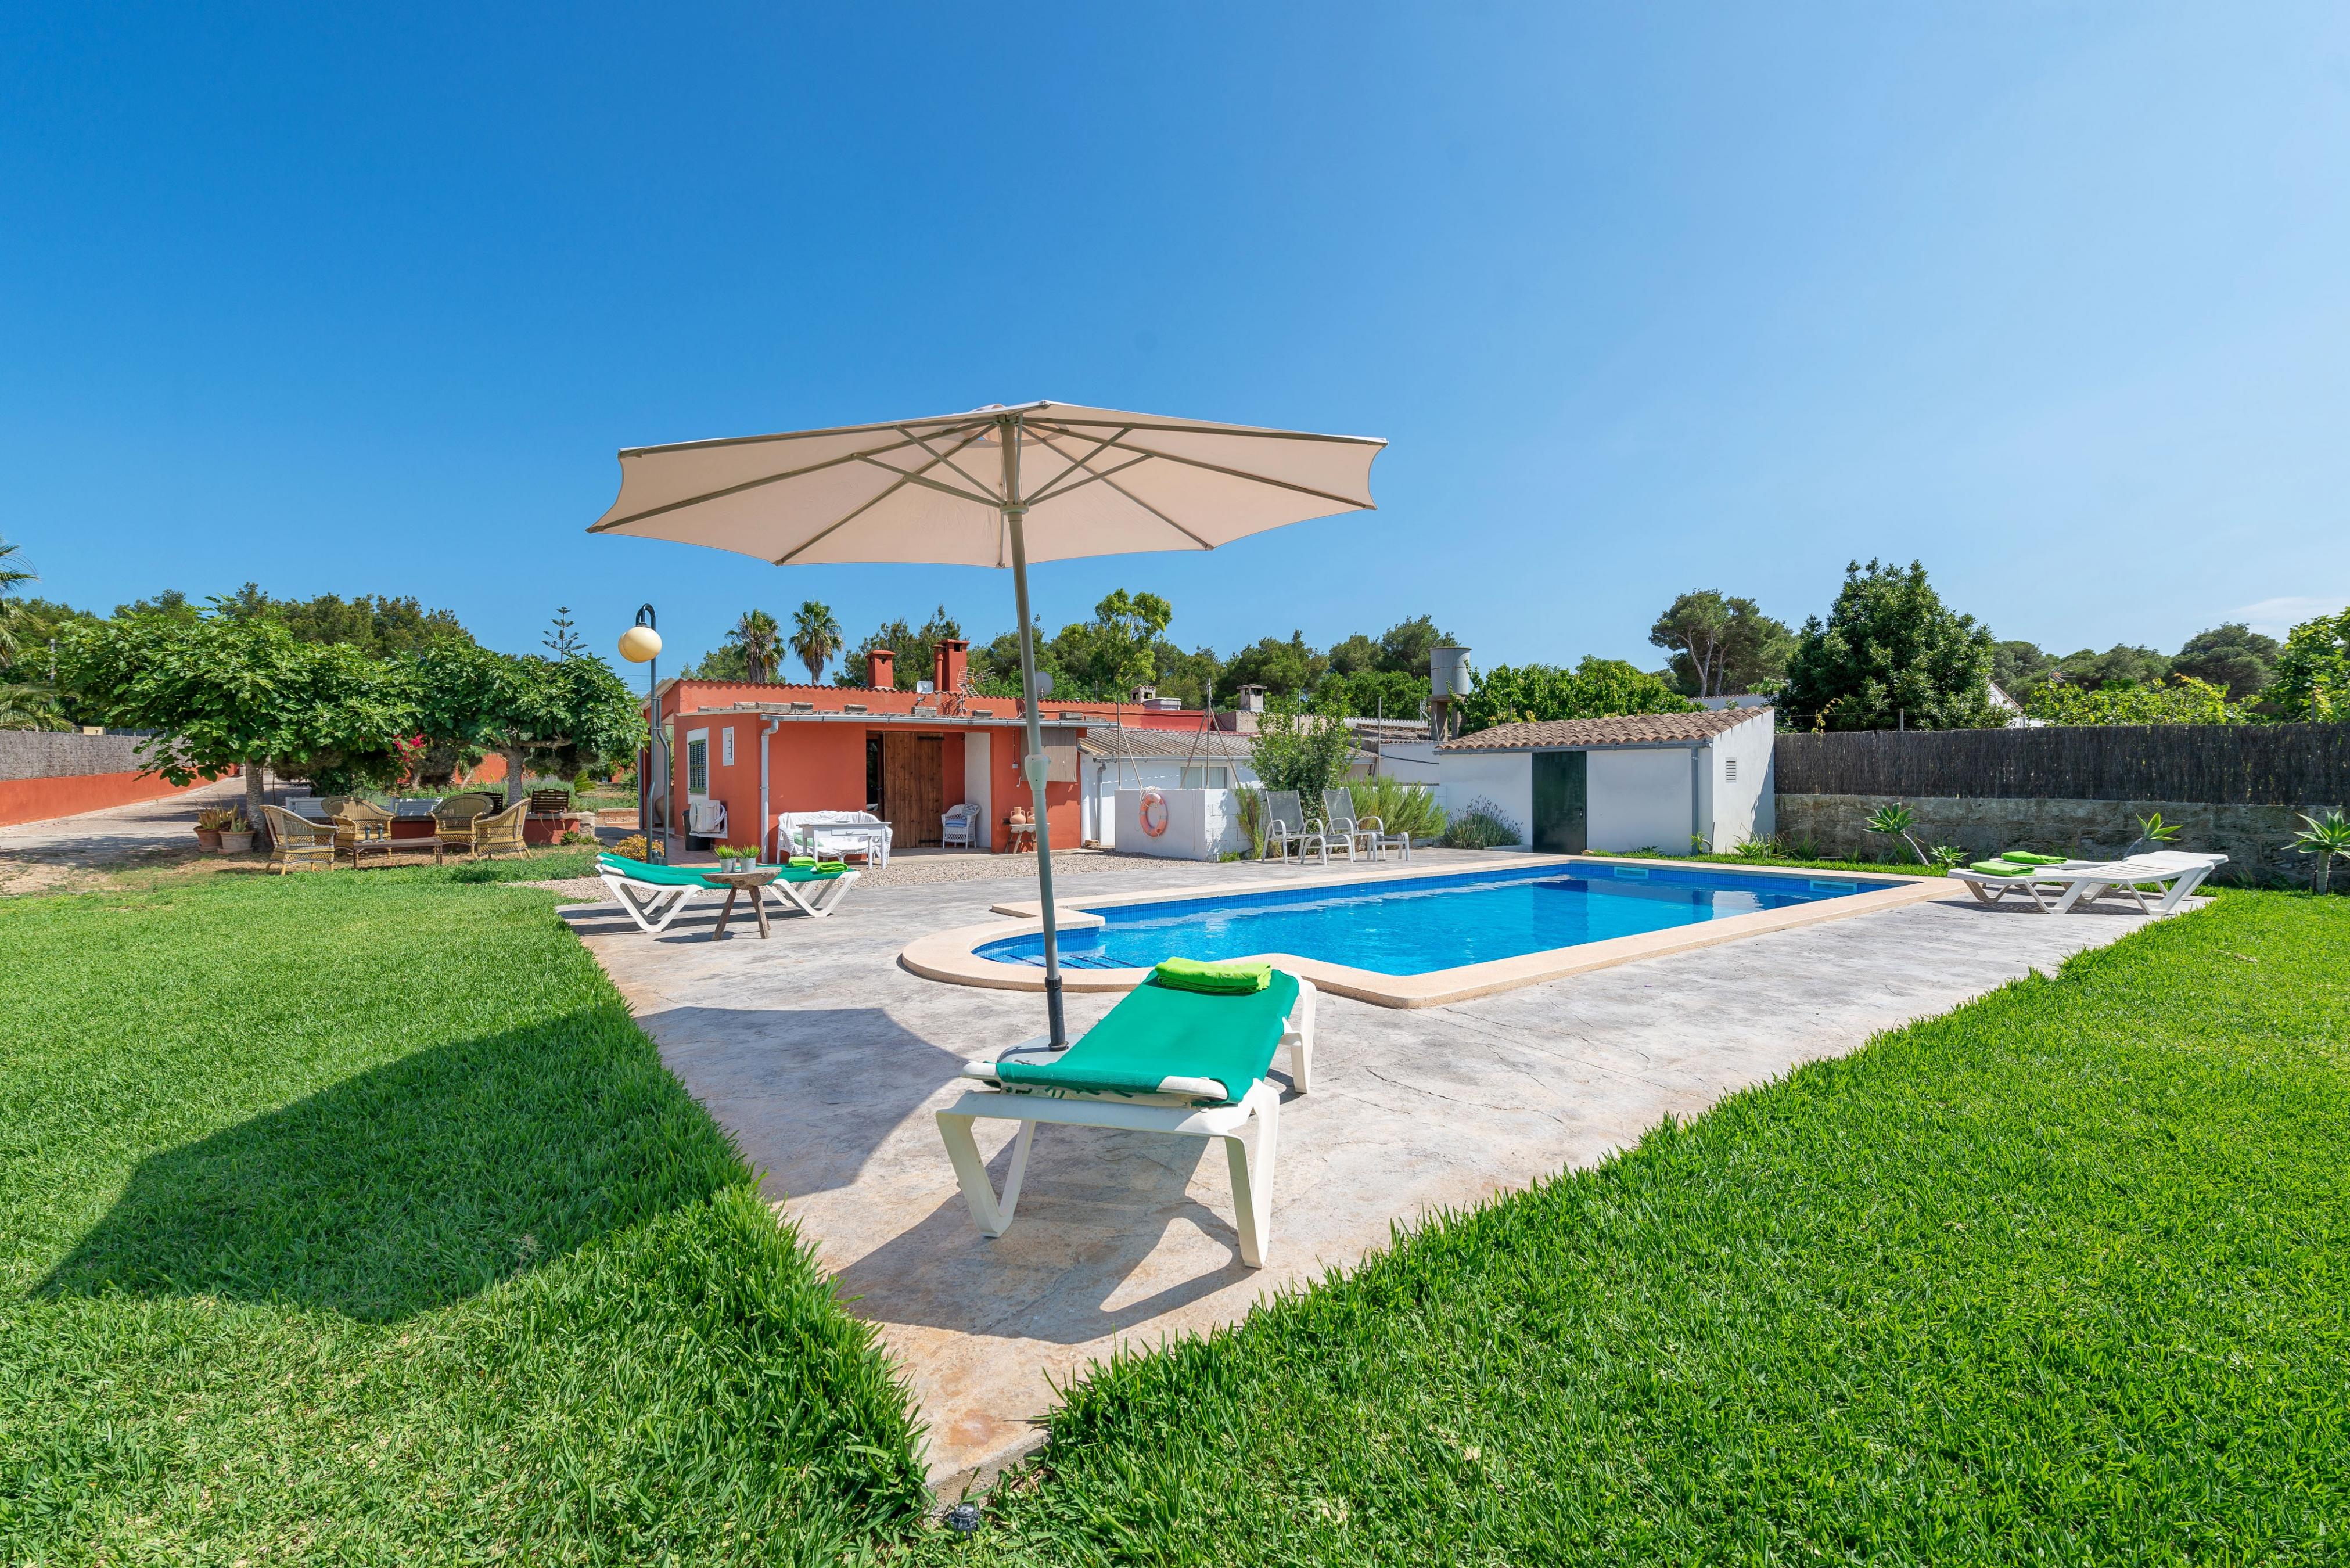 Property Image 1 - CAN CALAFAT - Villa with private pool near the beach. Free WiFi